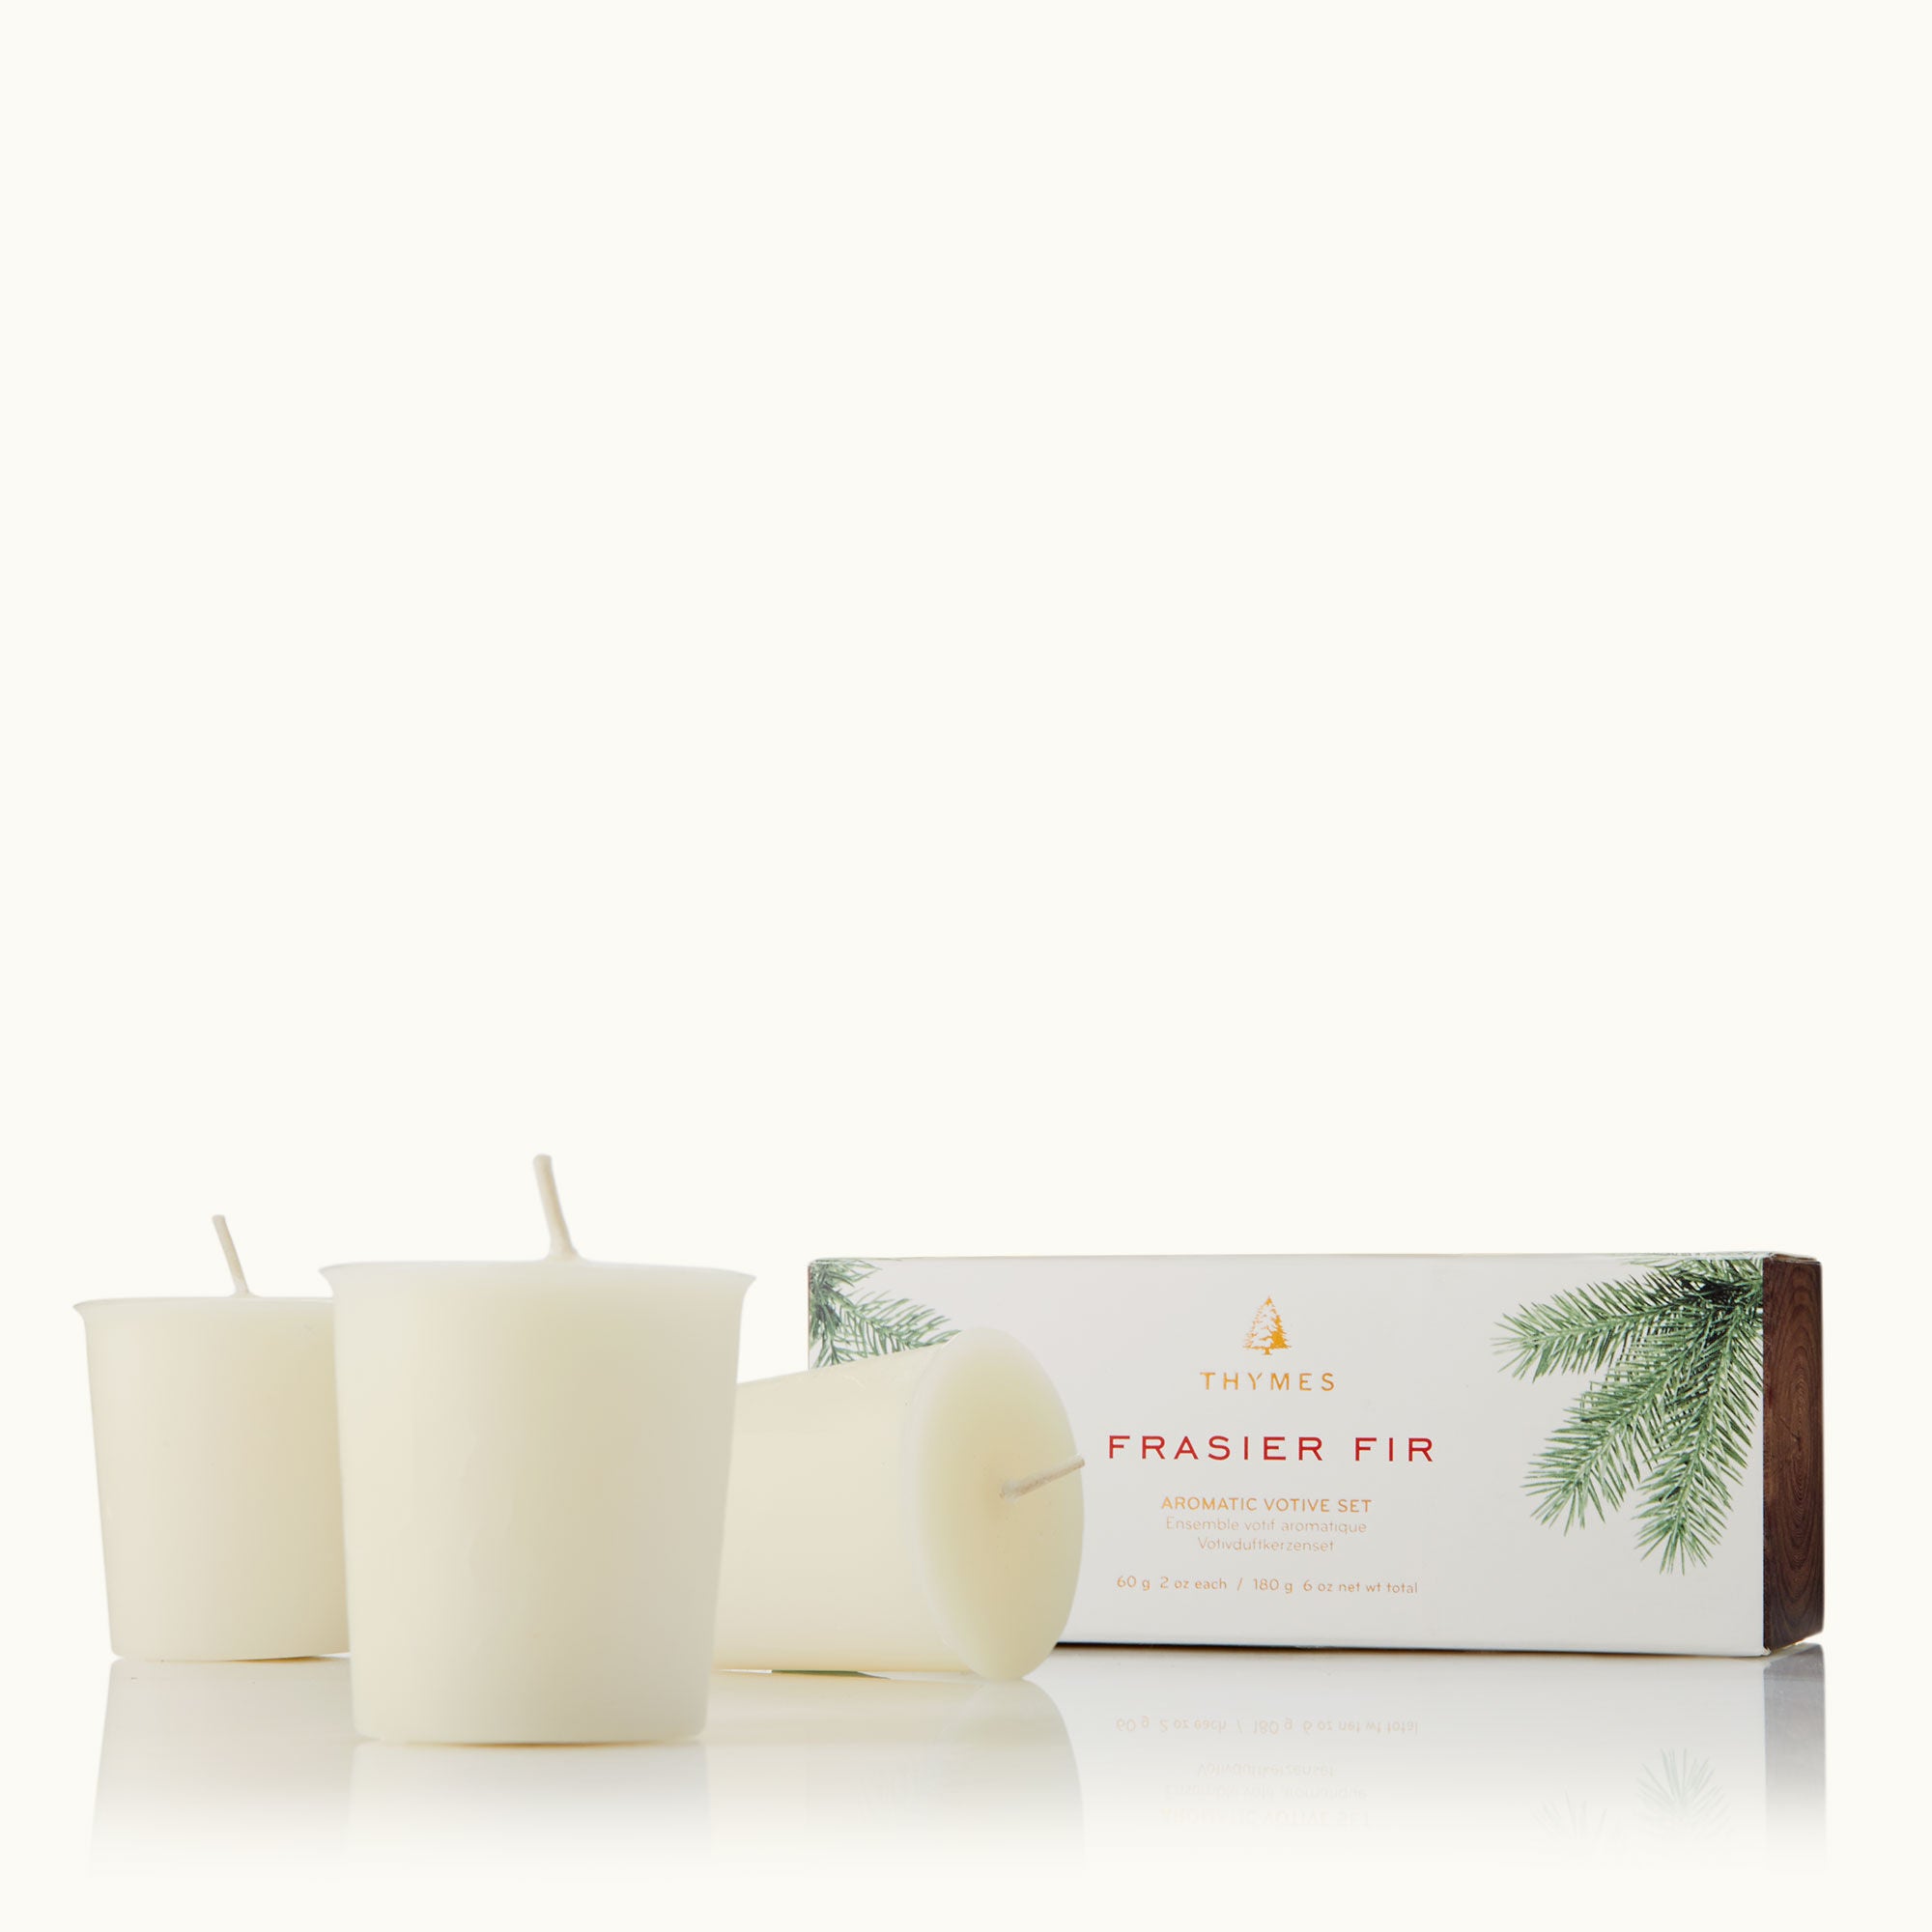 FRASIER FIR AROMATIC VOTIVE SET by THYMES